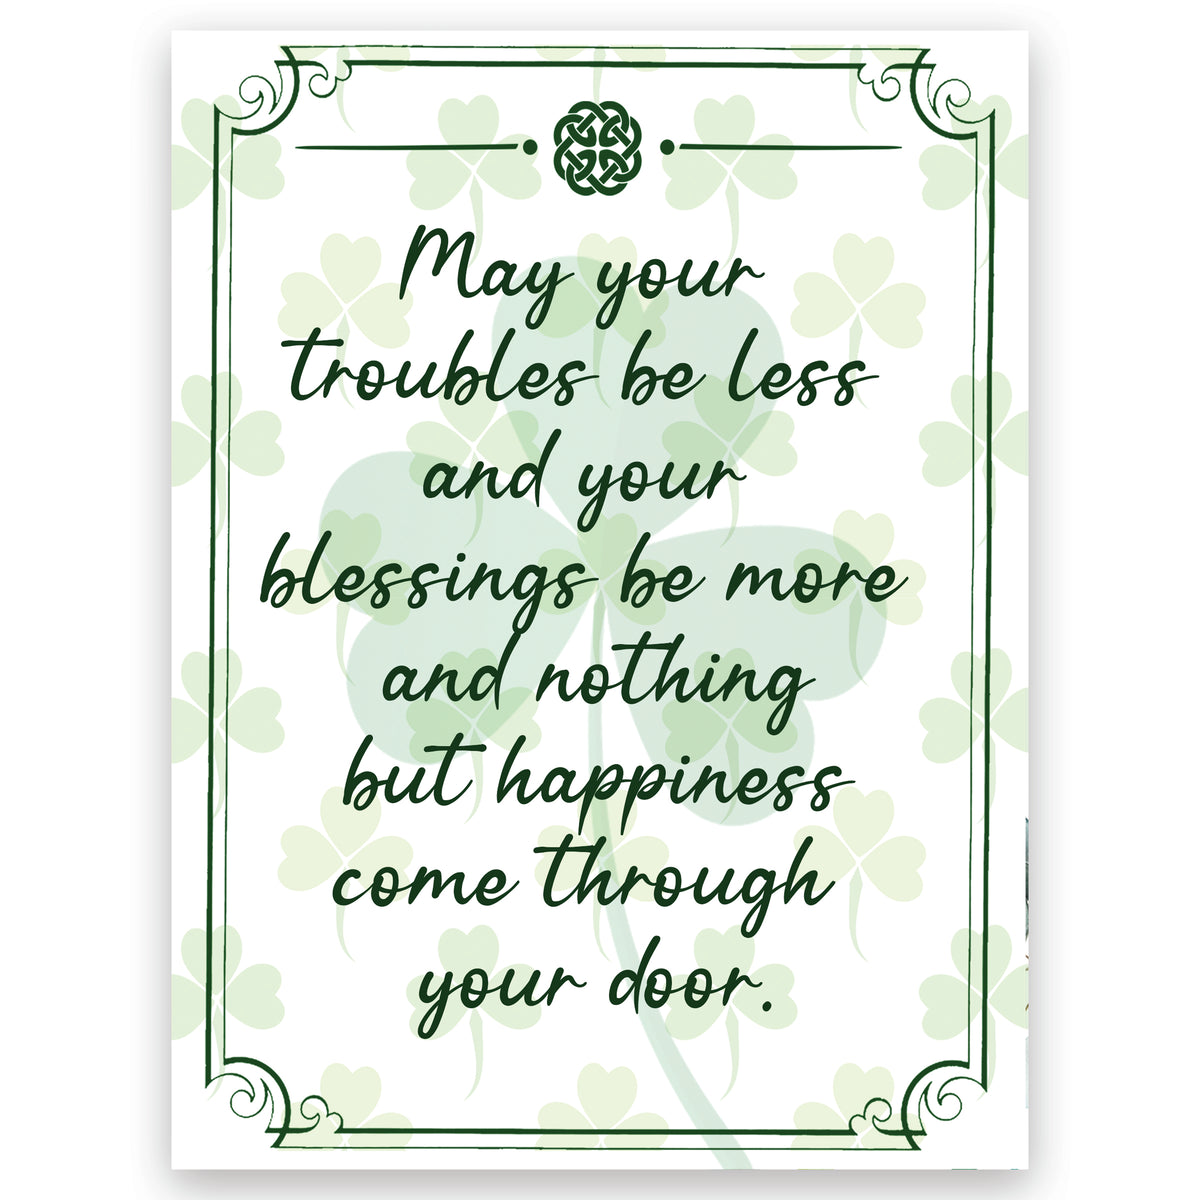 St. Patrick’s Day Irish Everyday Wooden Wall Plaque 6x8 - May Your Troubles Be Less